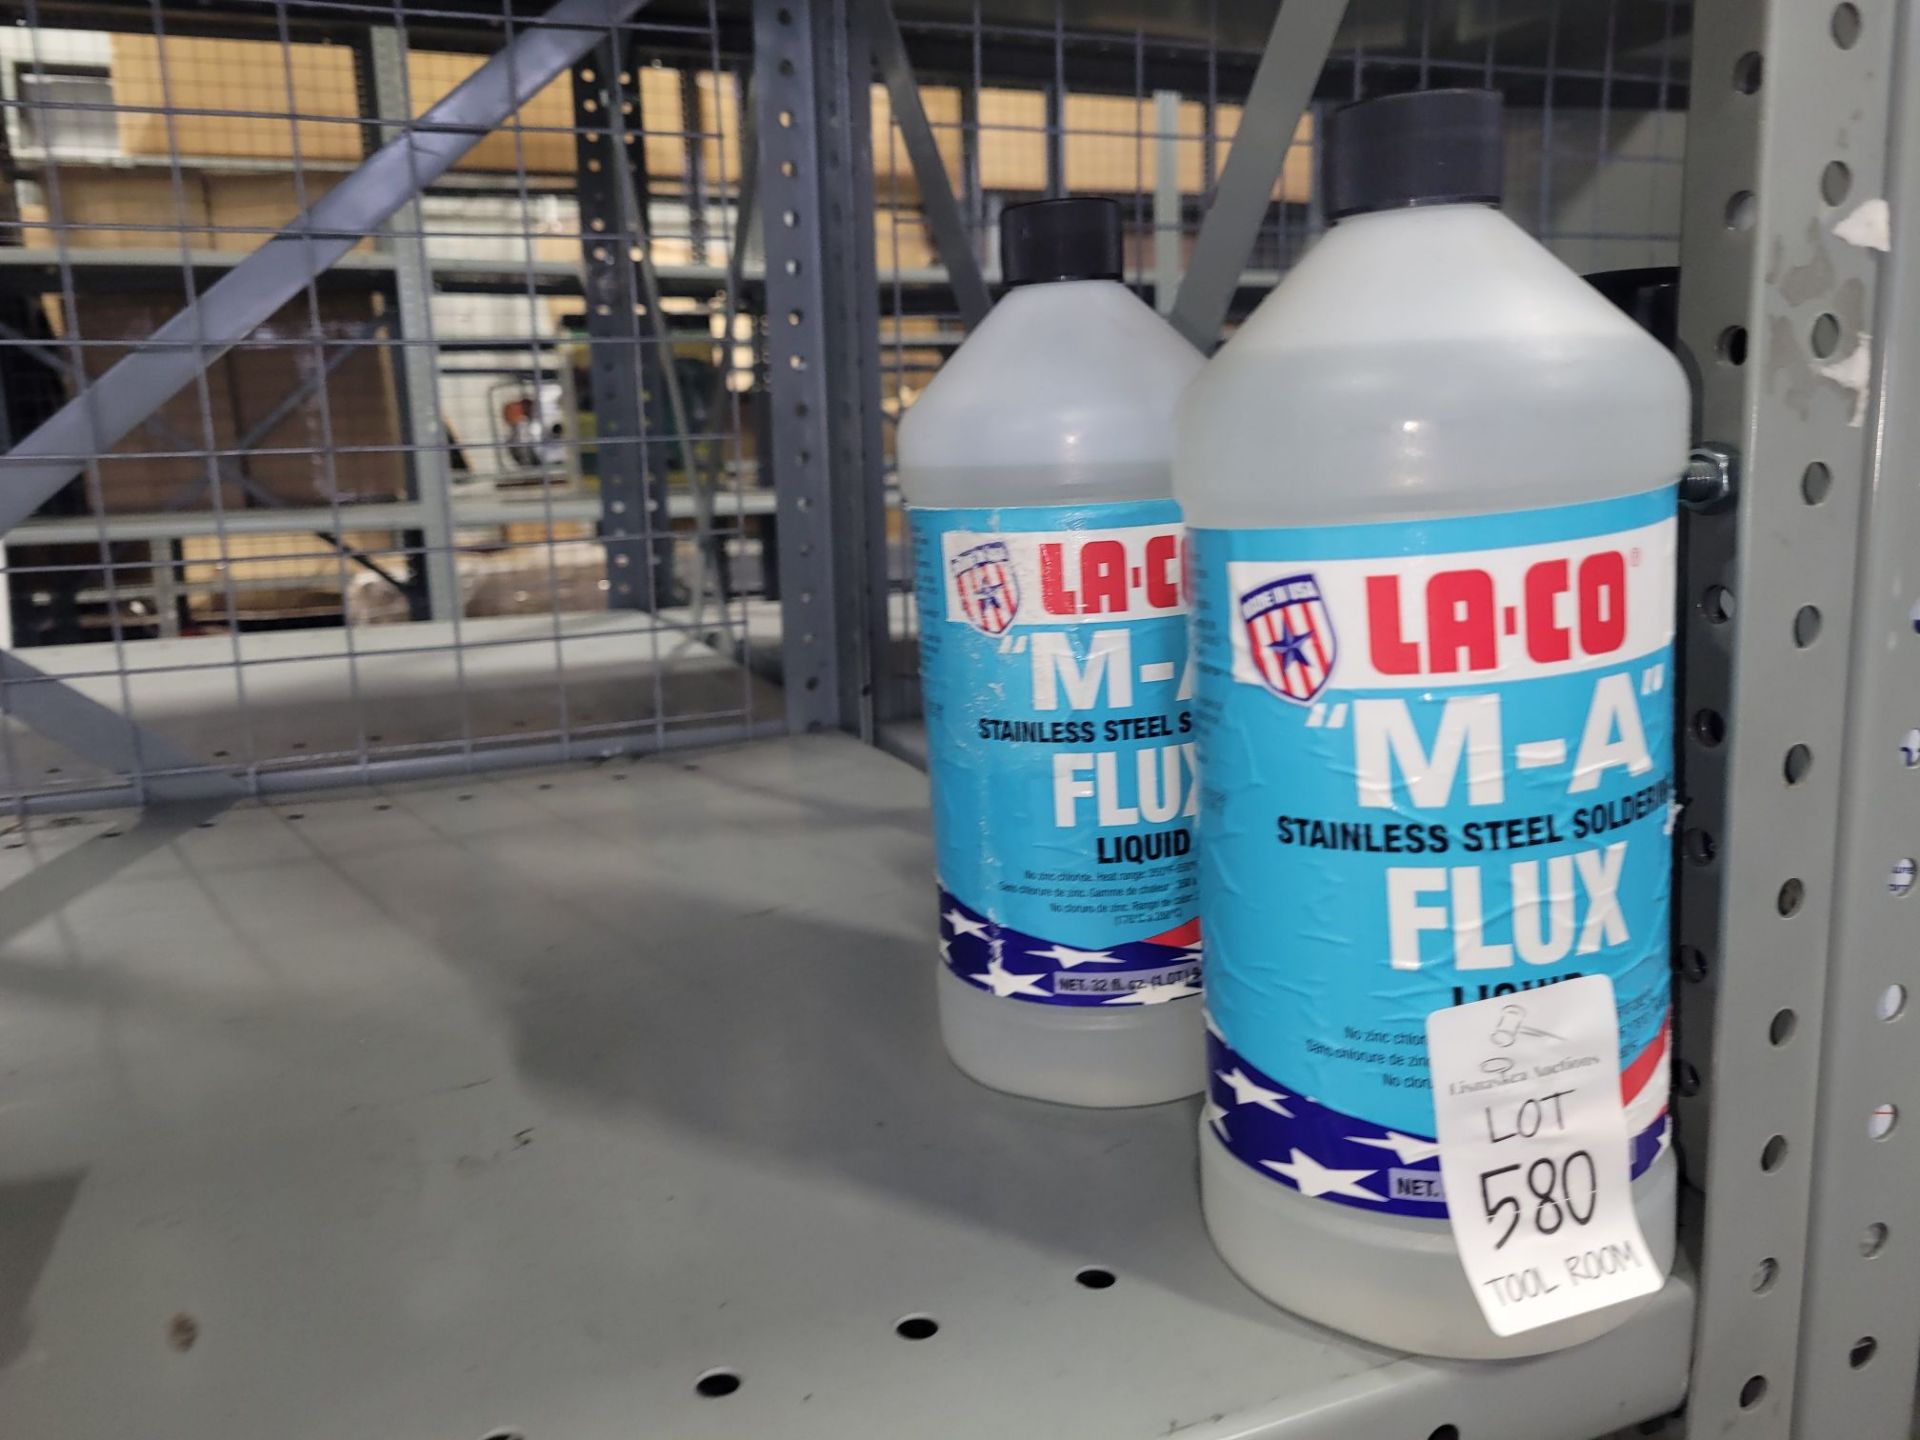 2x 946ML LACO M-A STAINLESS STEEL SOLDERING FLUX LIQUID